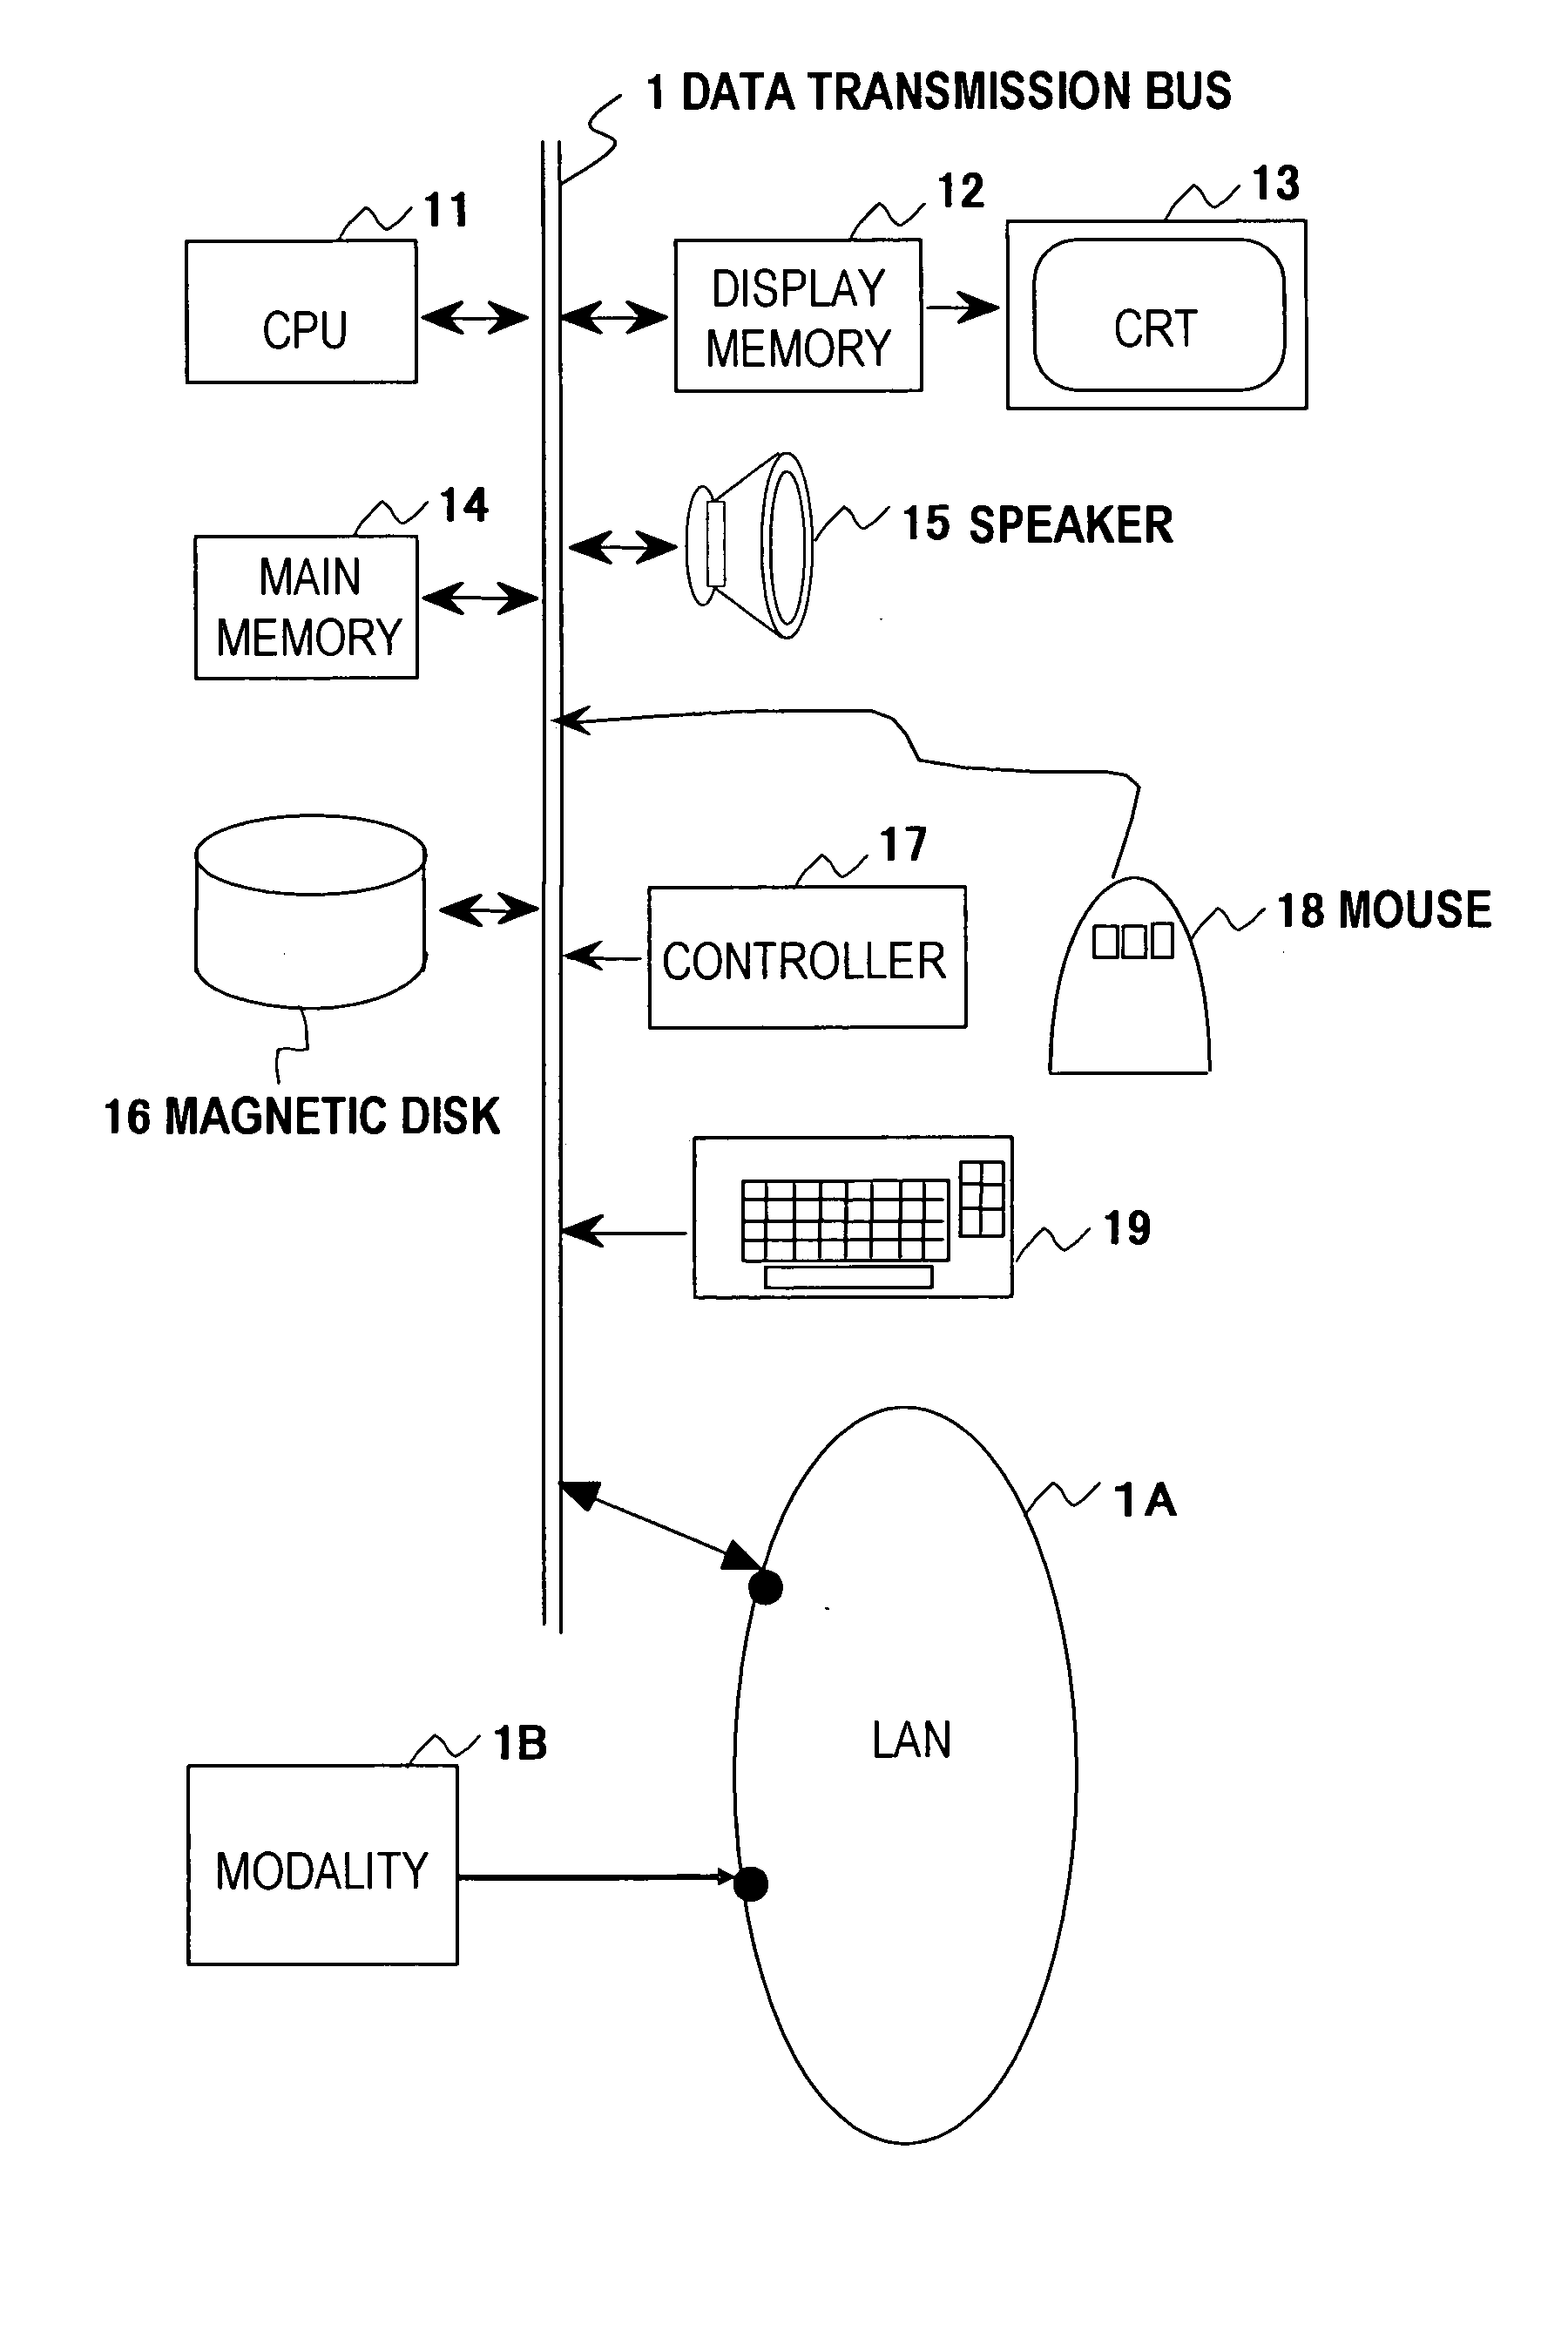 Medical image diagnosis support device and method